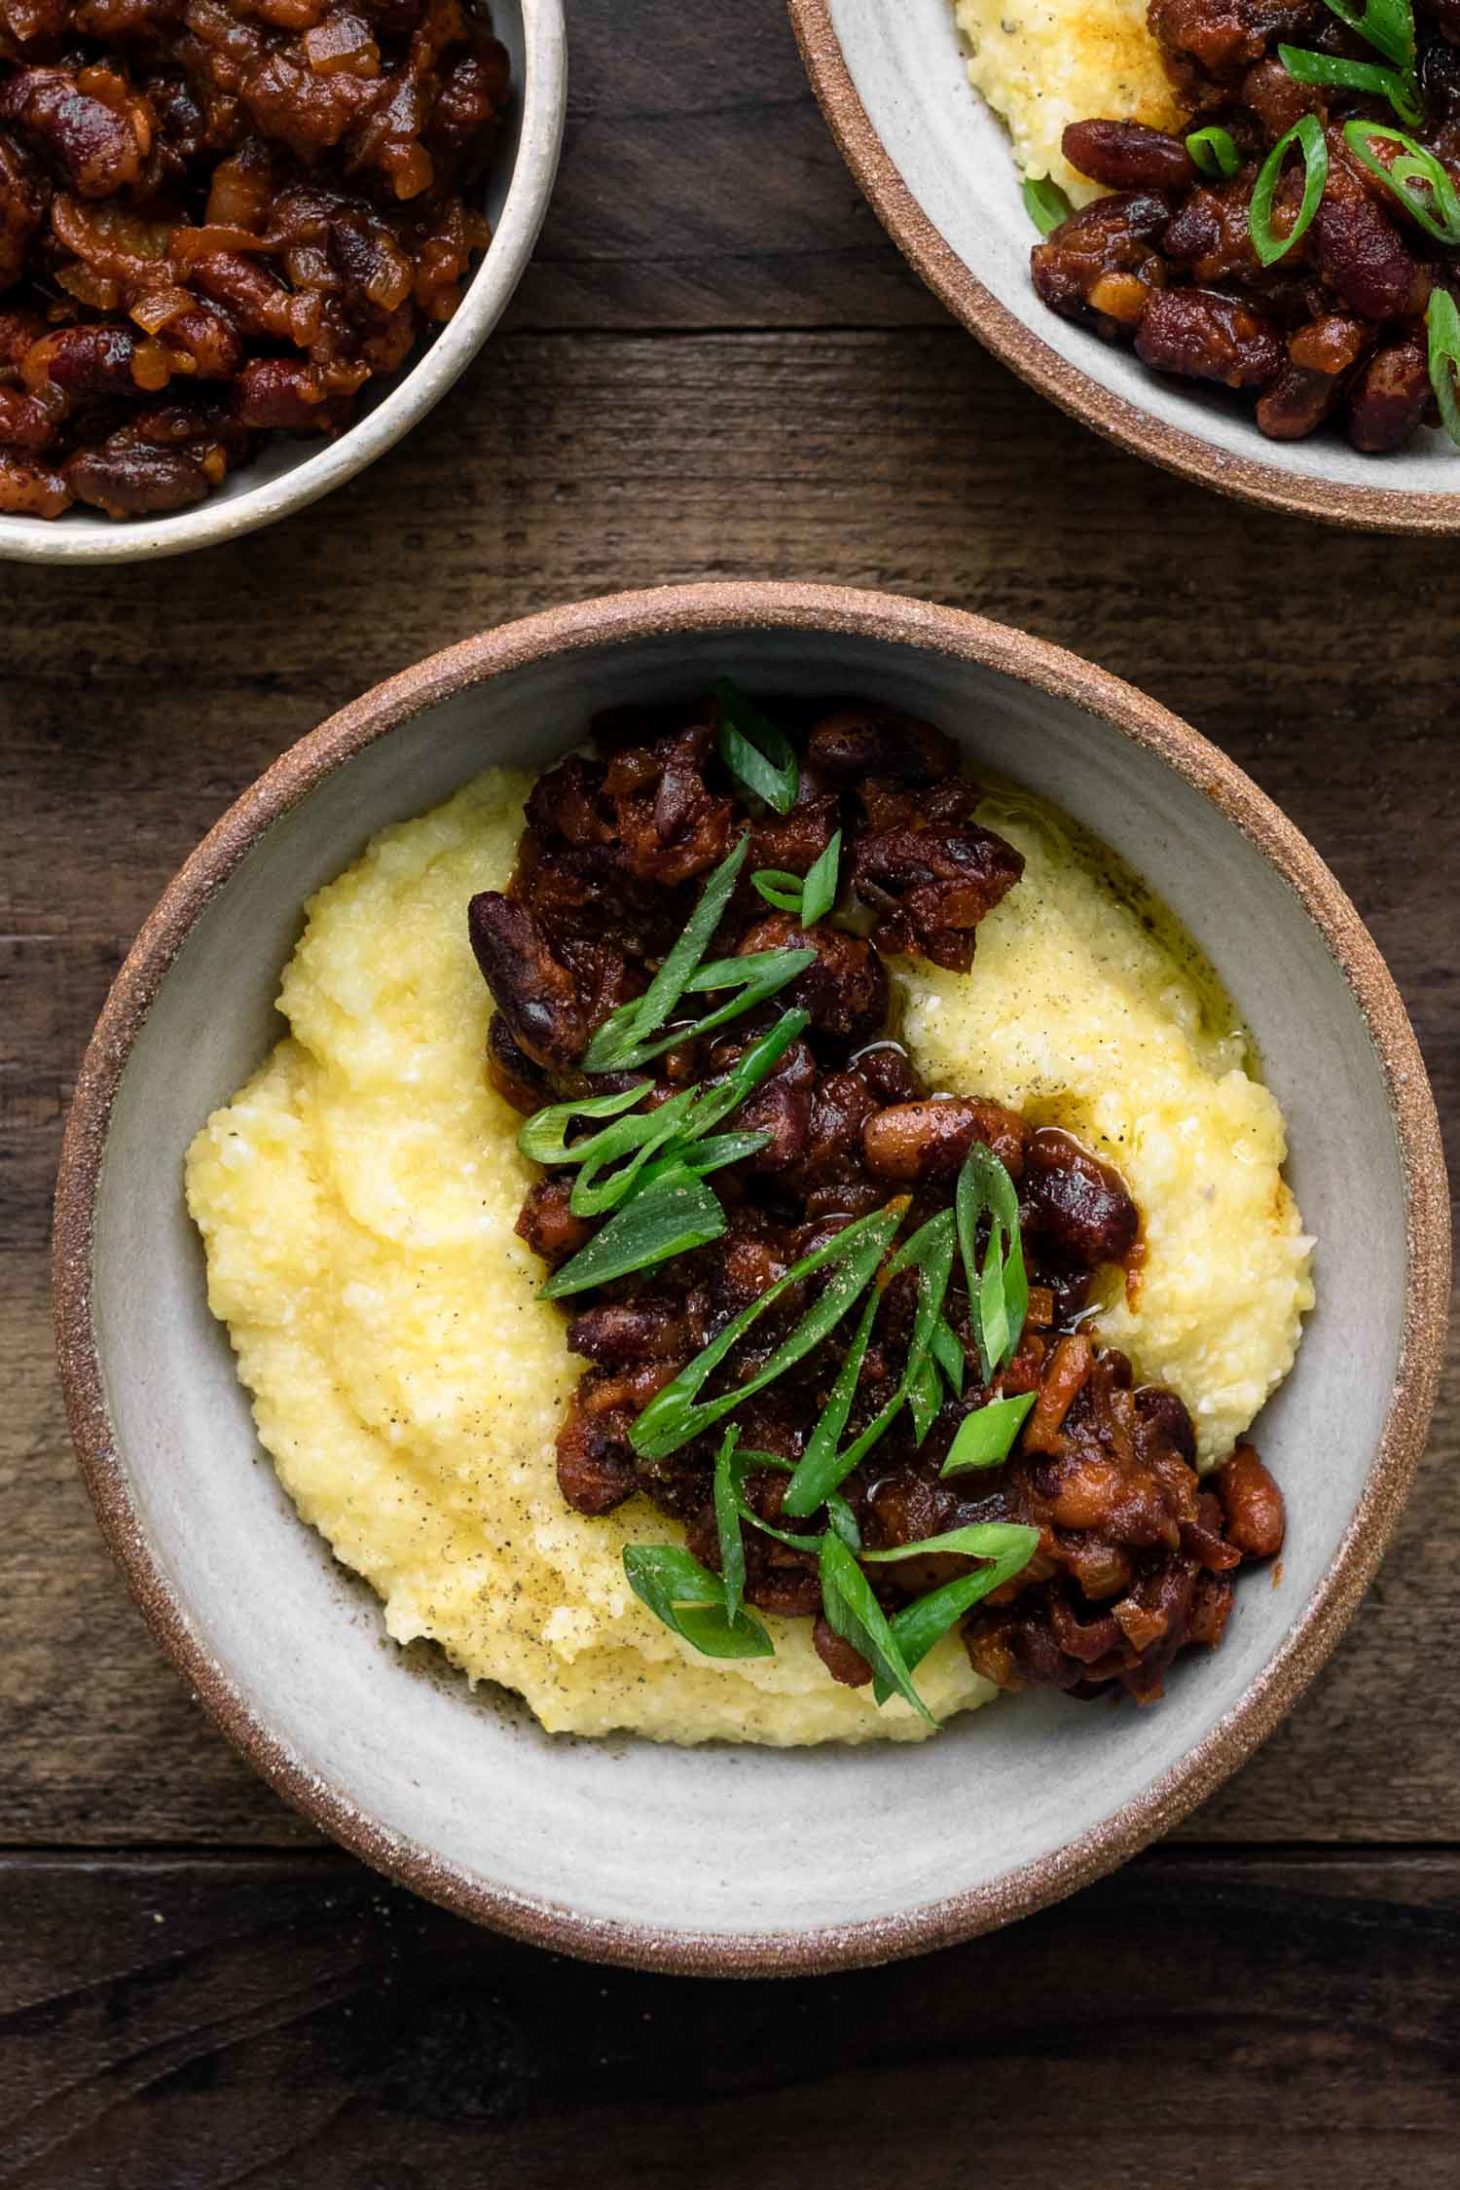 Smoky Beans and Polenta using Jacob's Cattle Beans